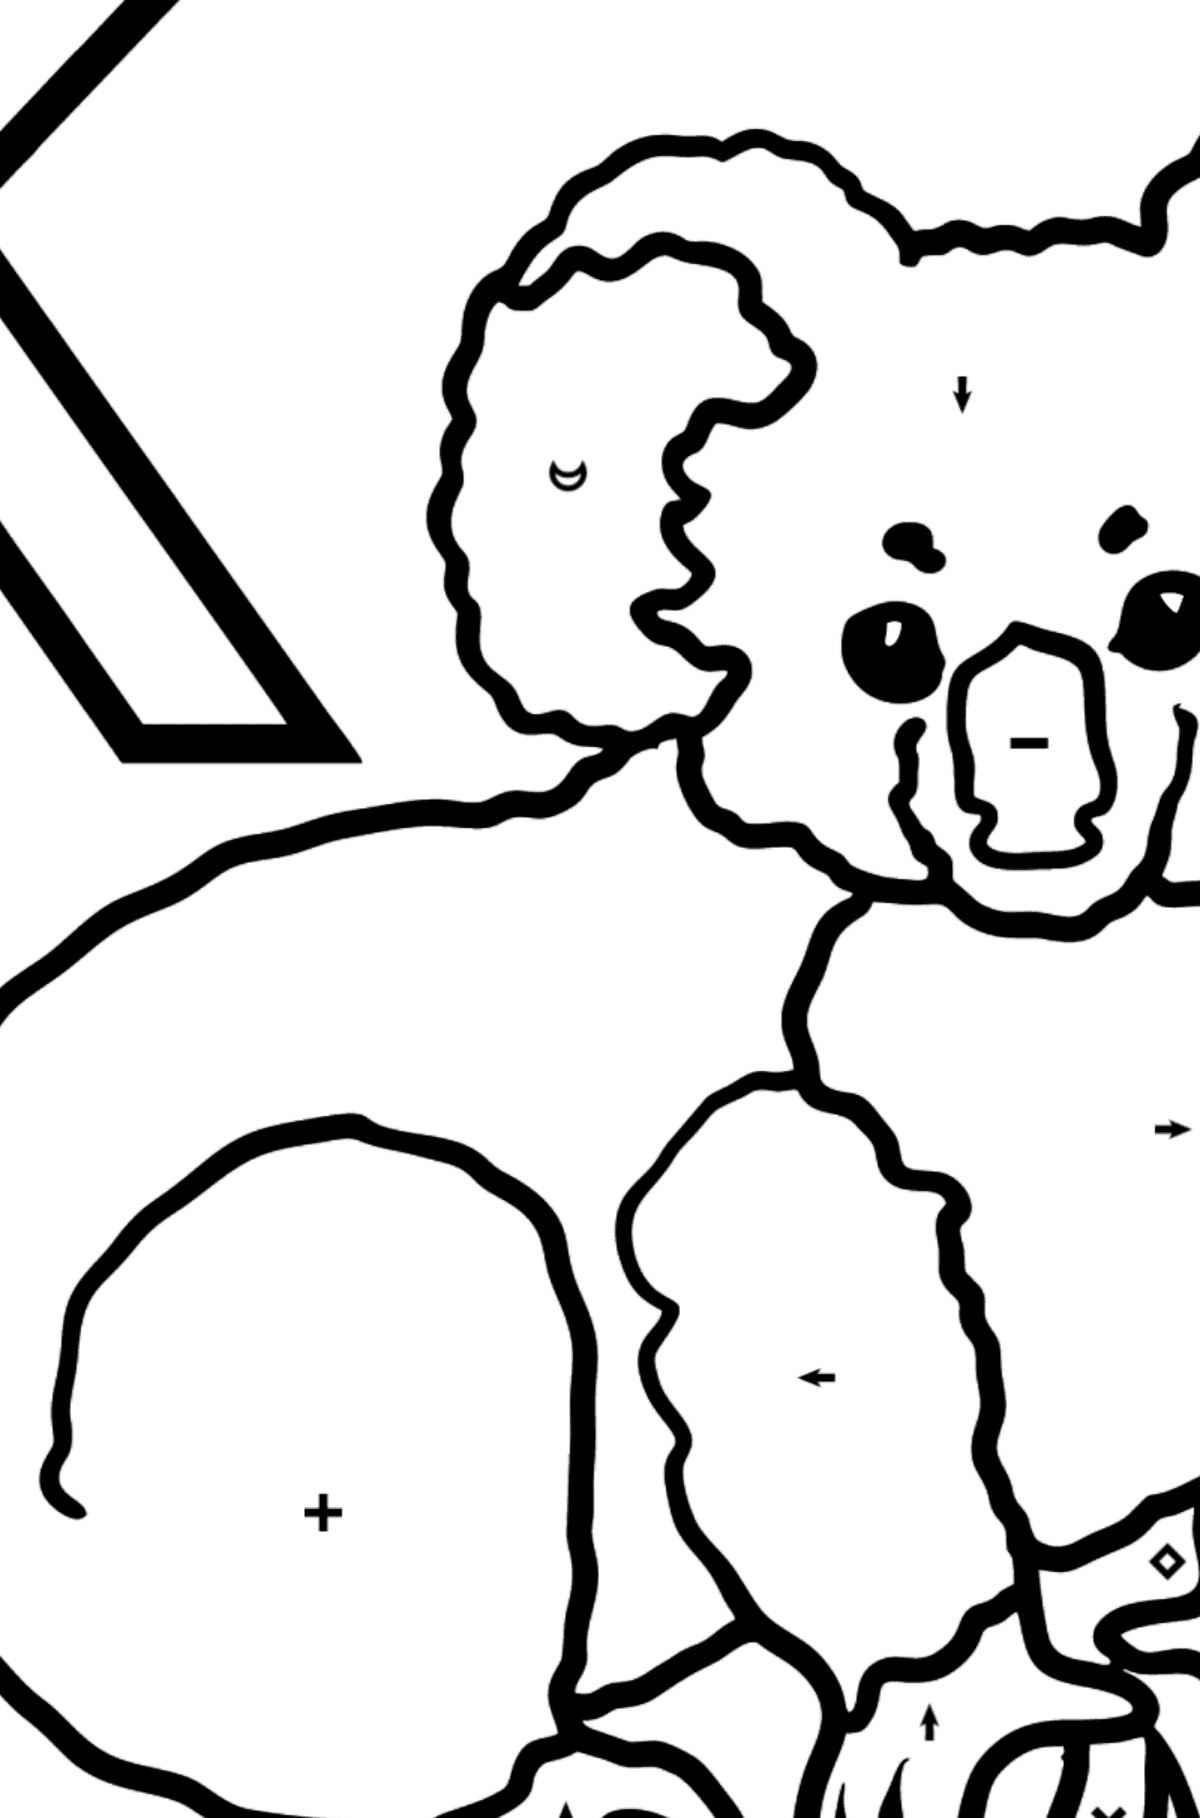 Spanish Letter K coloring pages - KOALA - Coloring by Symbols for Kids